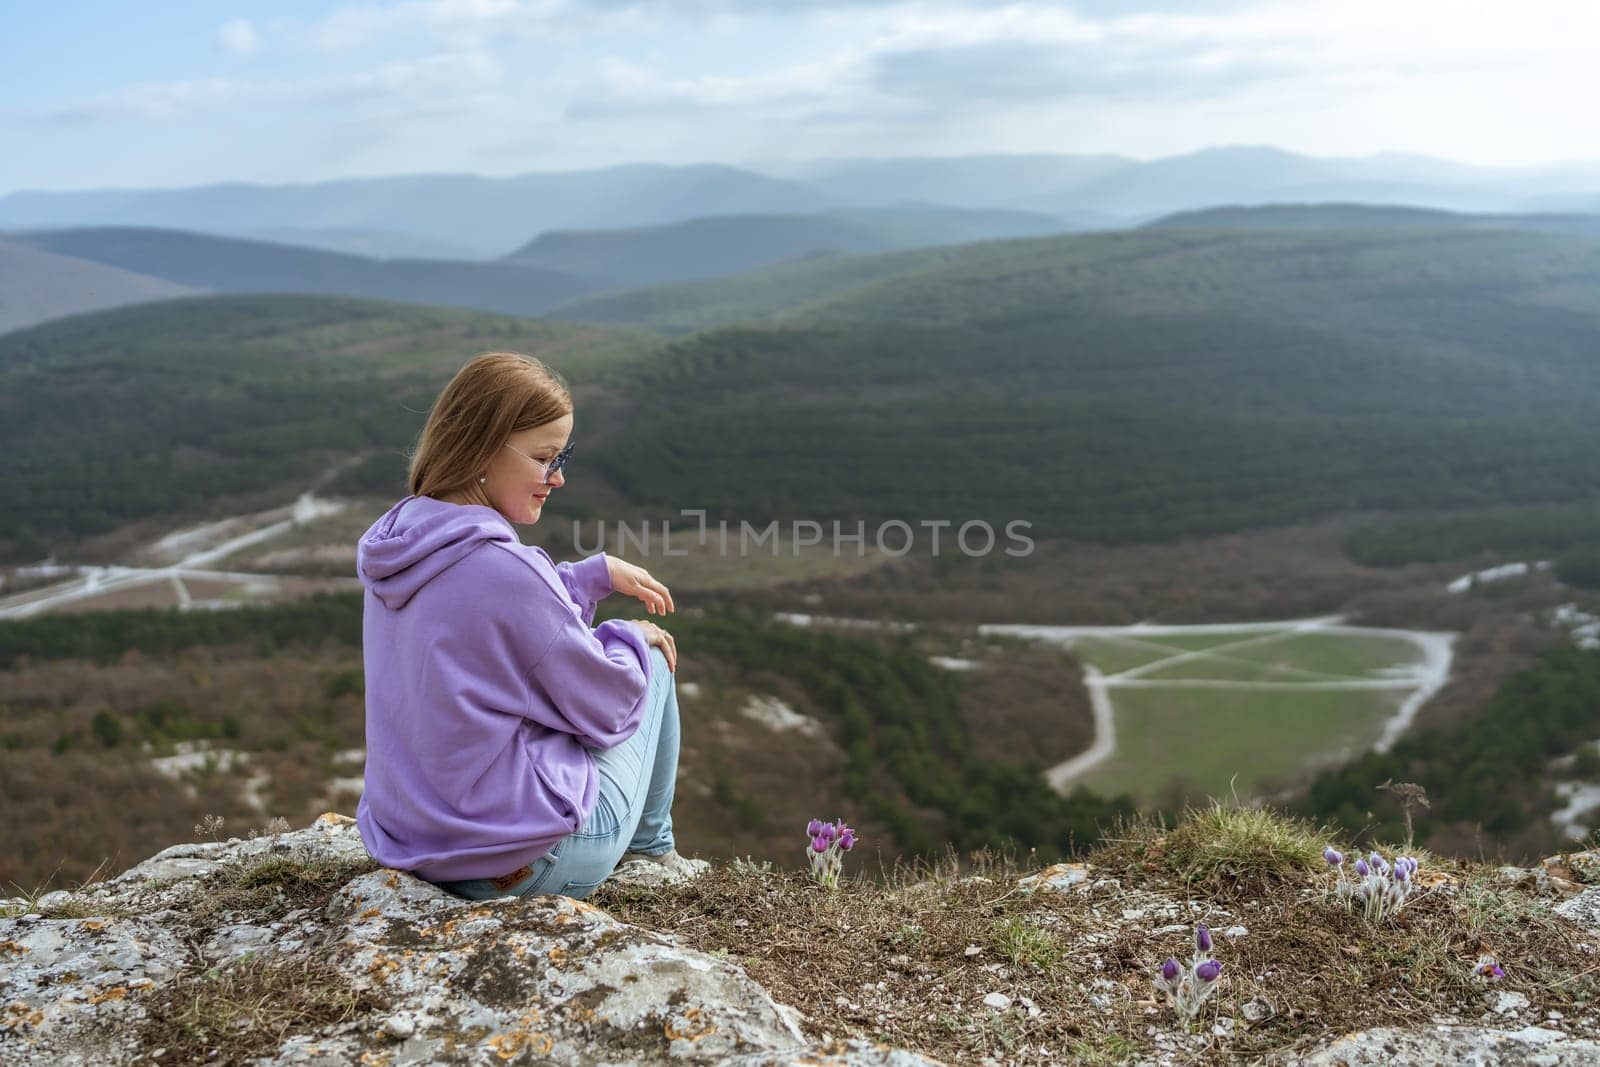 Girl on mountain peak looking at beautiful mountain valley in fog at sunset in summer. Landscape with sporty young woman, foggy hills, forest, sky. Travel and tourism, hiking.